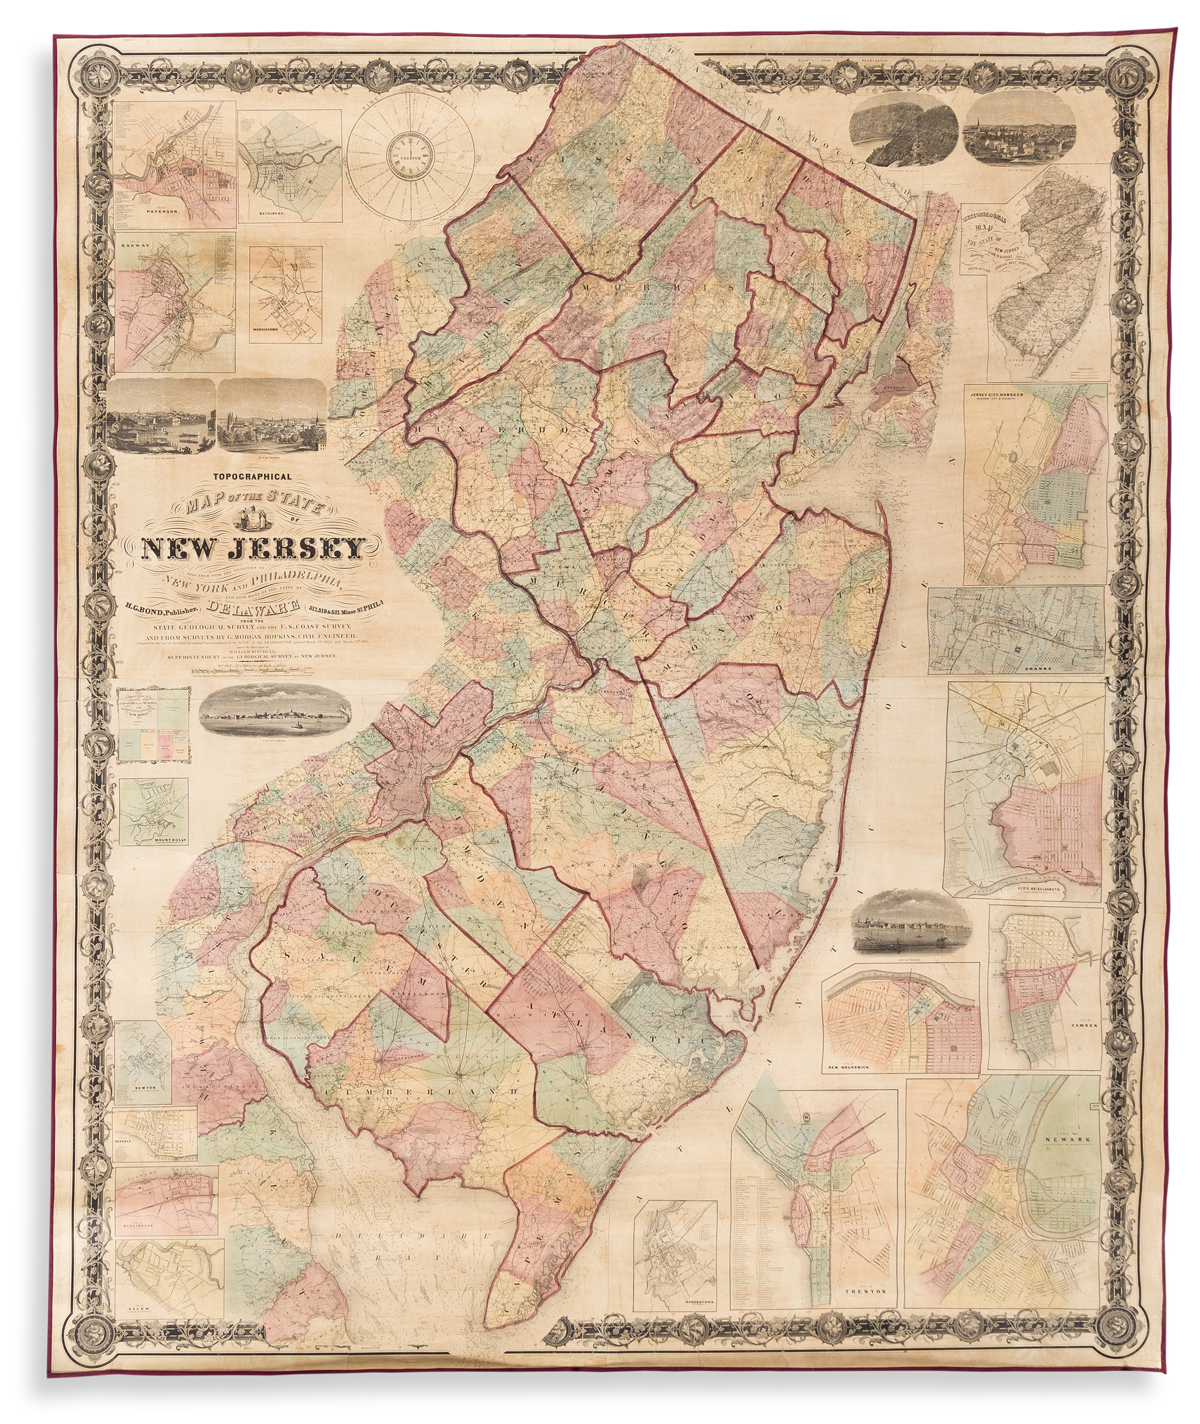 (NEW JERSEY.) William Kitchell. Topographical Map of the State of New Jersey